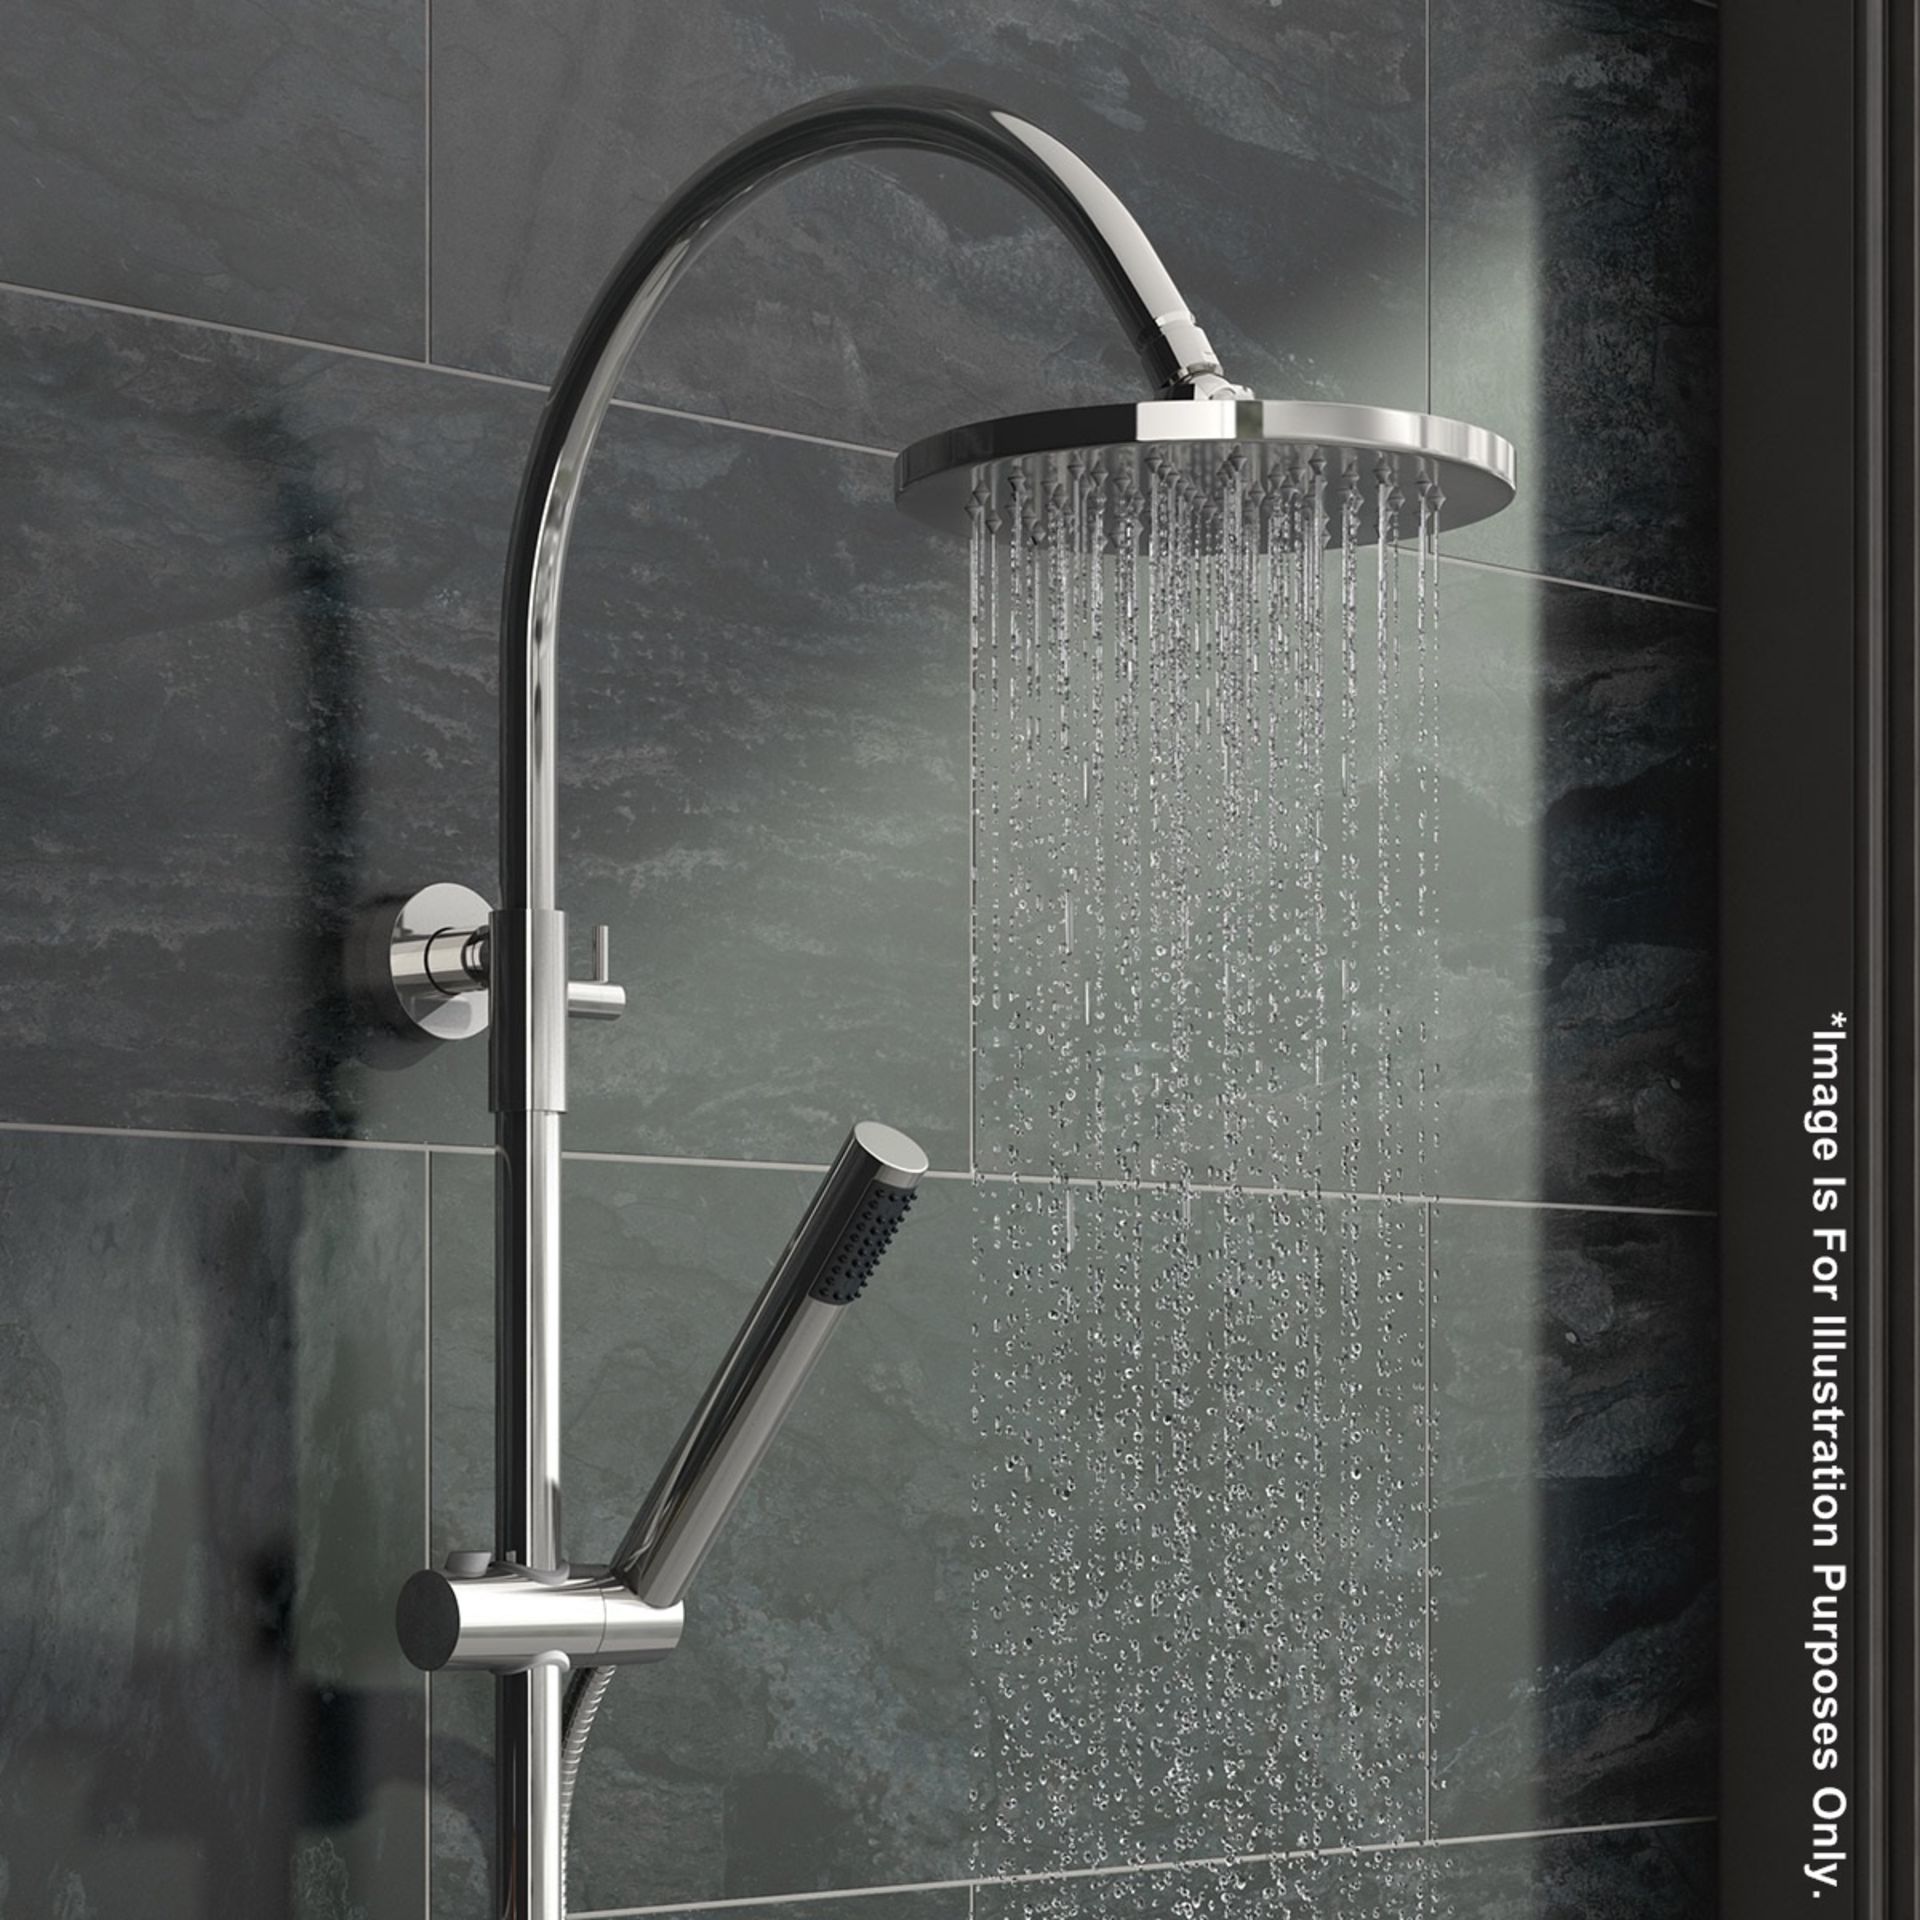 1 x ARIA Round Head Thermostatic Shower Kit - Chrome - CILISS4 - Ref: MBI027 - CL190 - Location: - Image 3 of 15